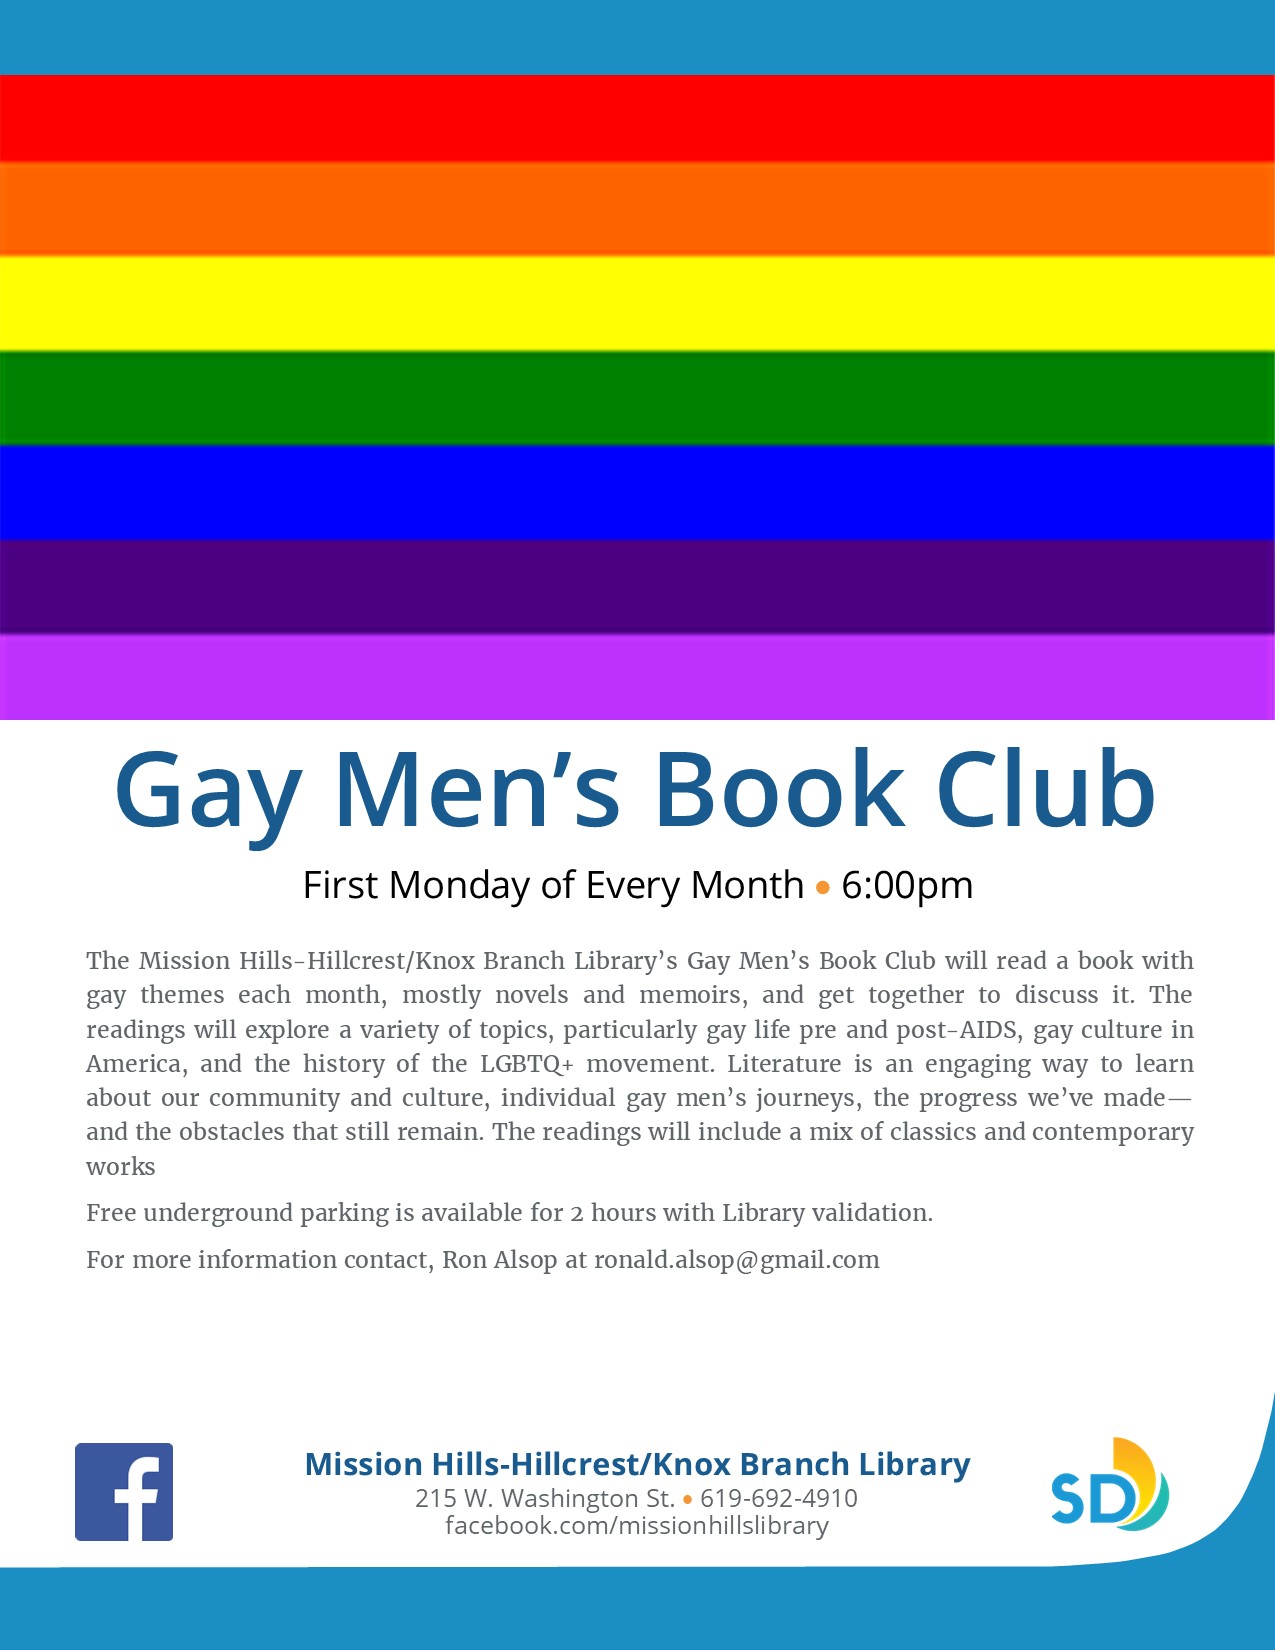 Flyer with Pride Flag